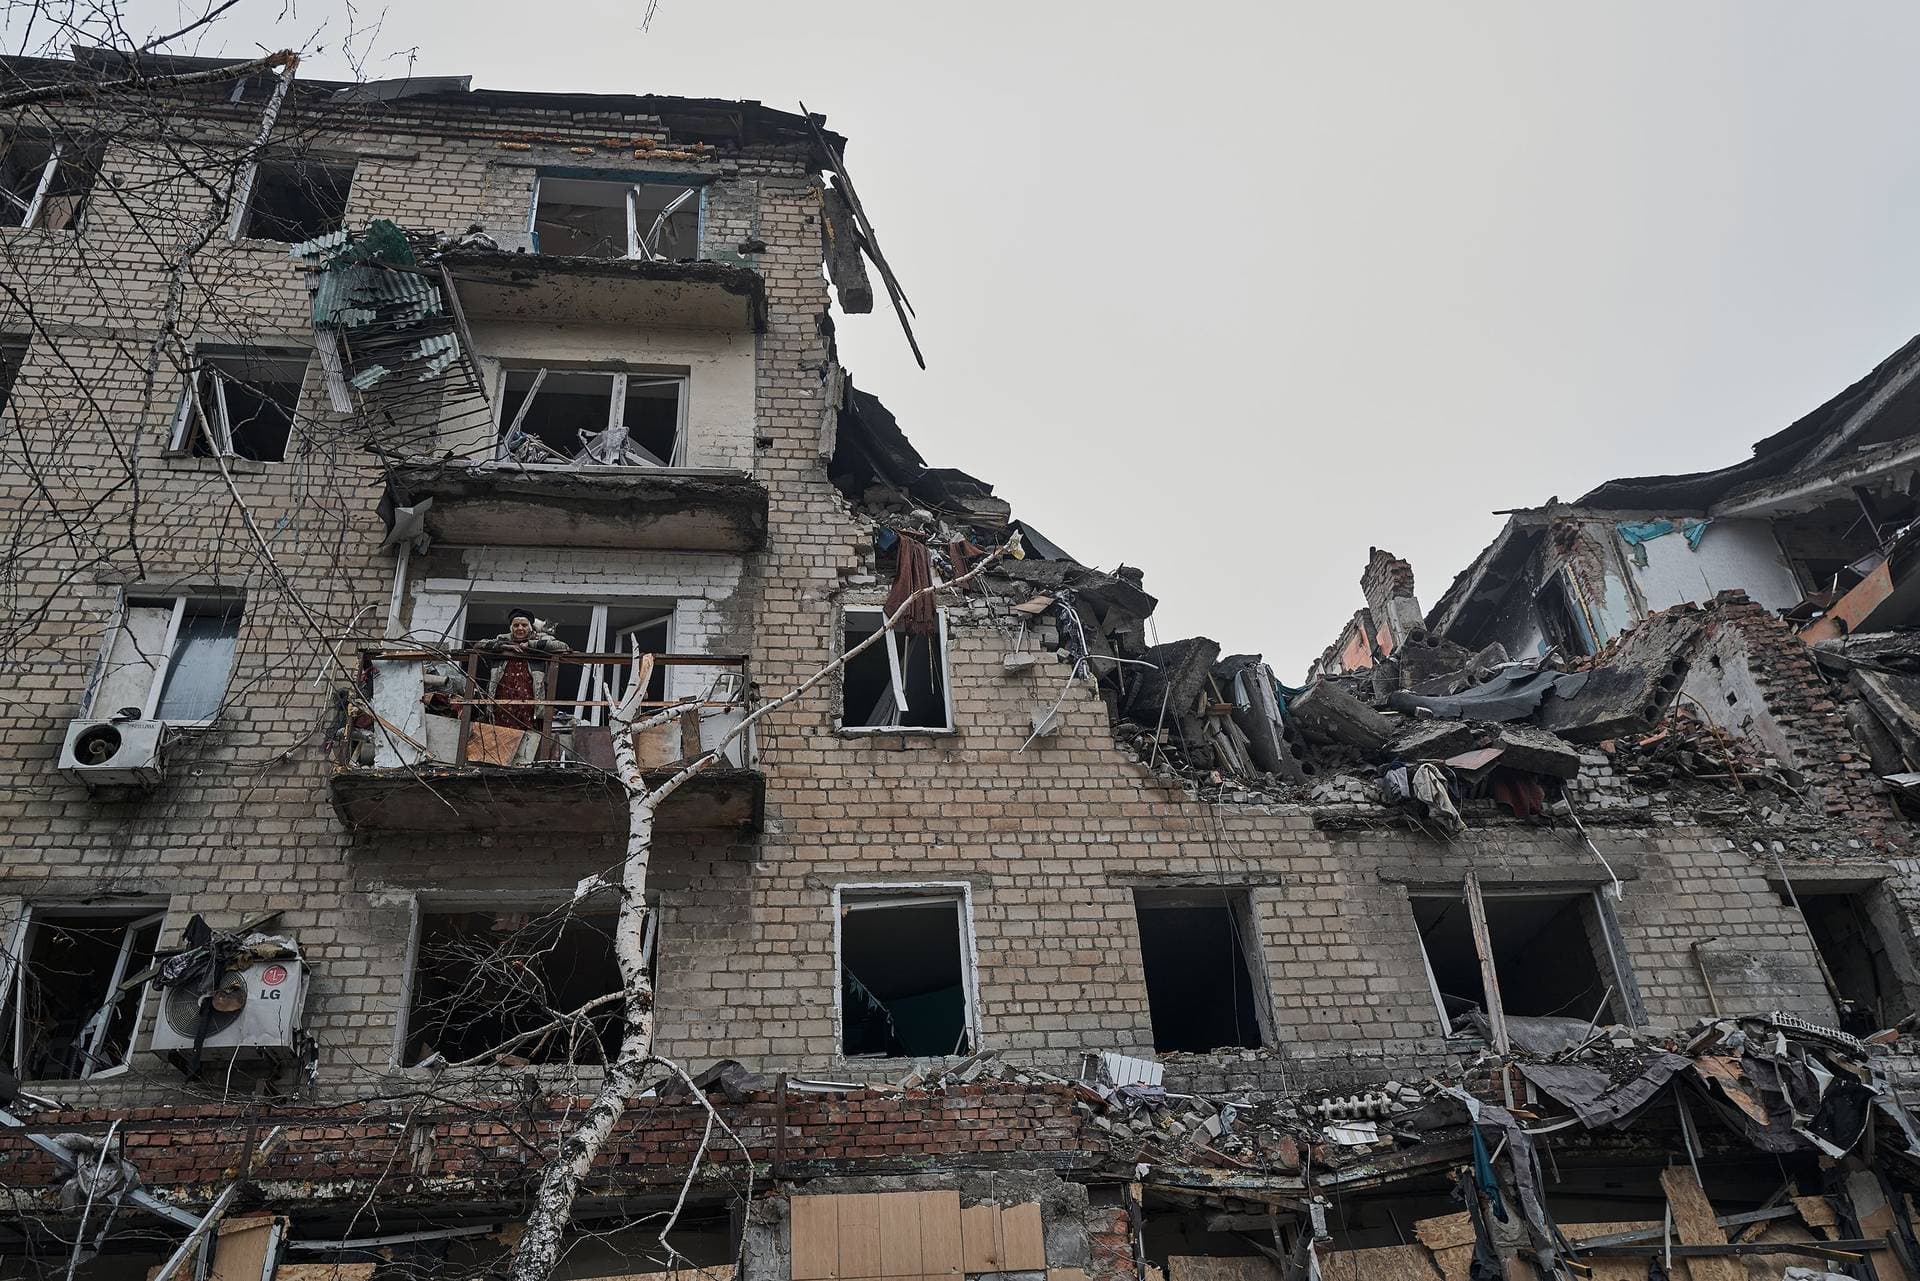 An elderly civilian woman stands with a cat on the balcony of her destroyed house in the Ukrainian city of Avdiivka